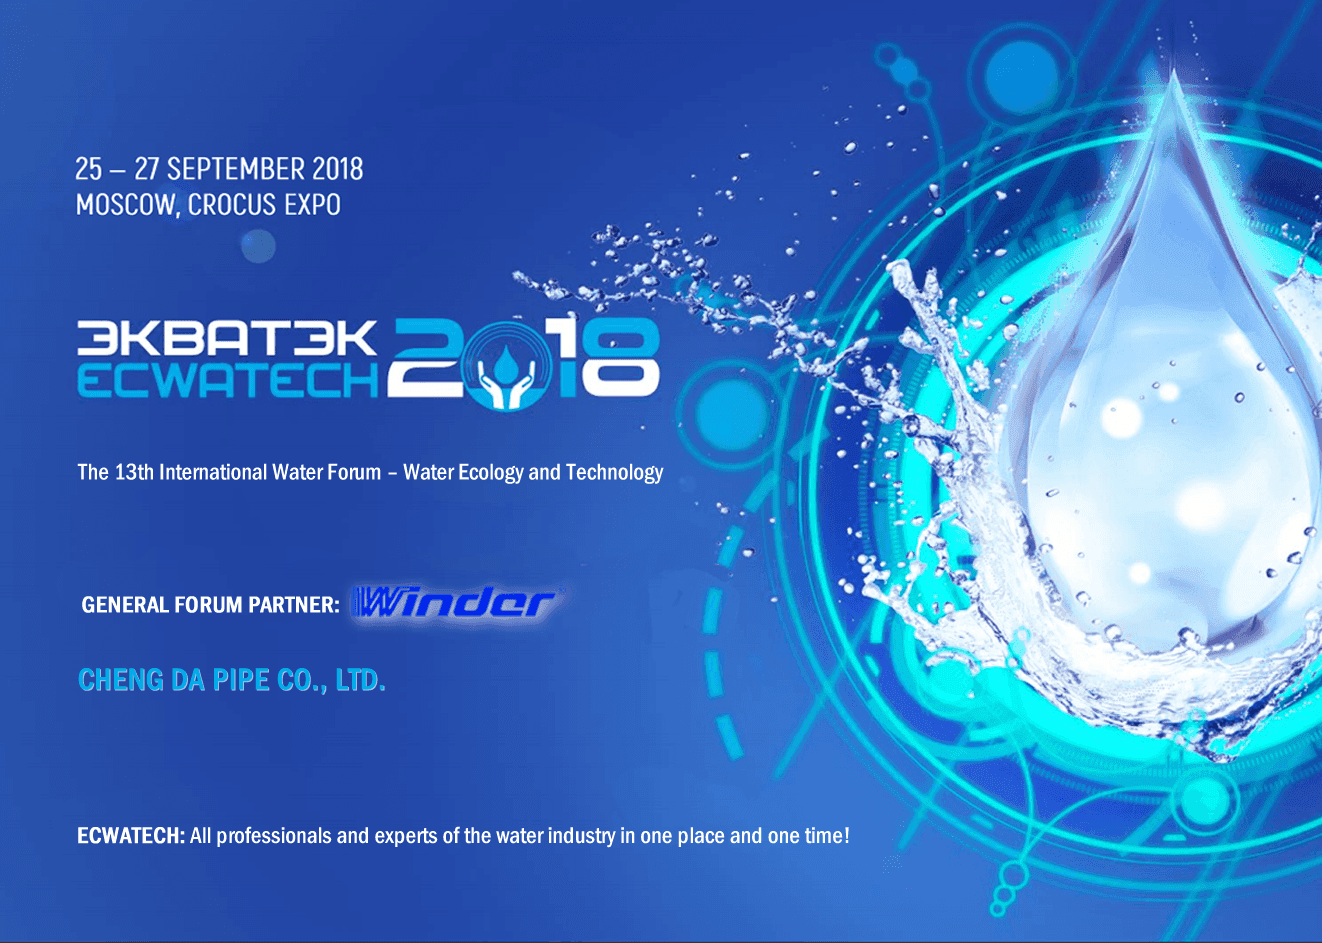 The 13th international water forum will be held in Crocus Expo, Moscow, Russia.